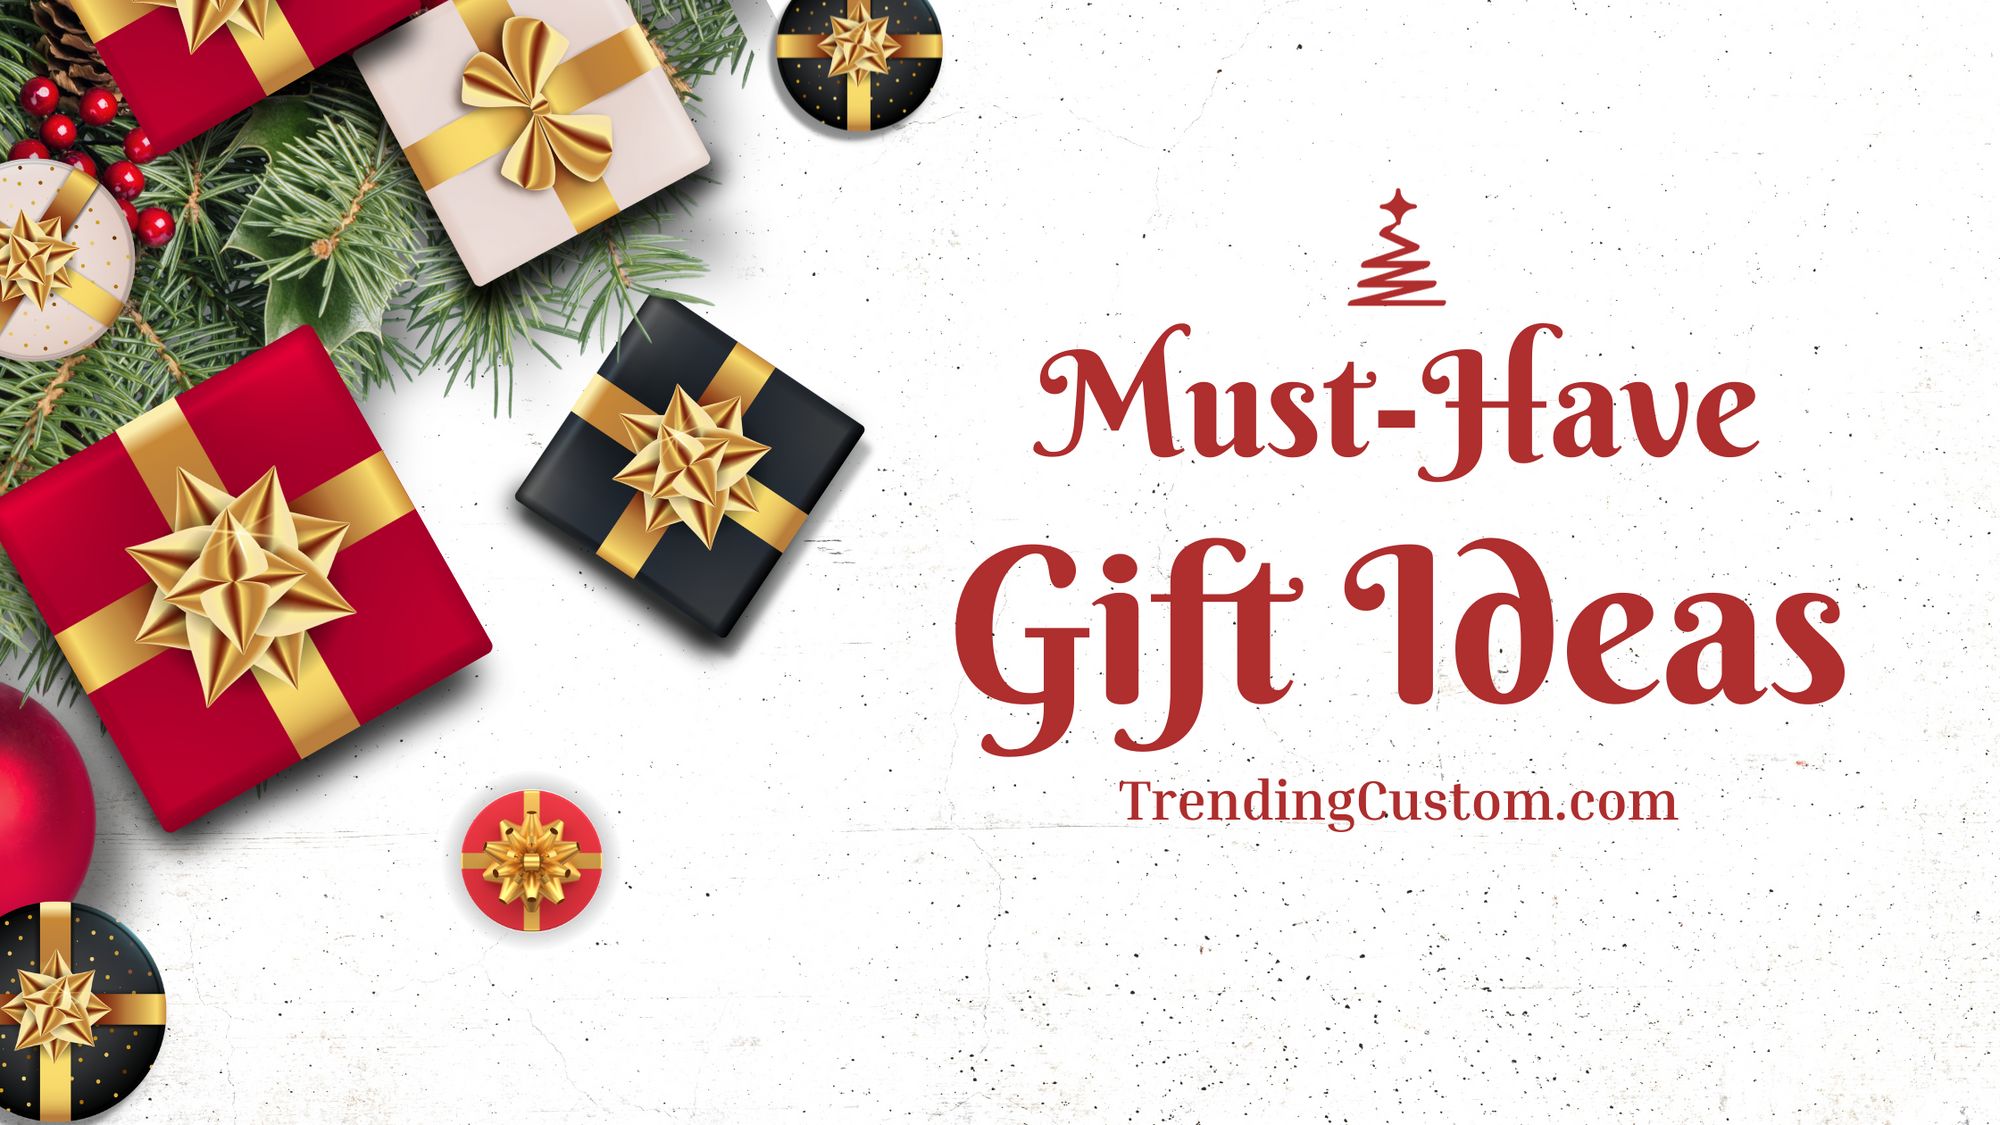 TrendingCustom.com: Your Ultimate Gift Destination – Must-Have Gift Ideas!